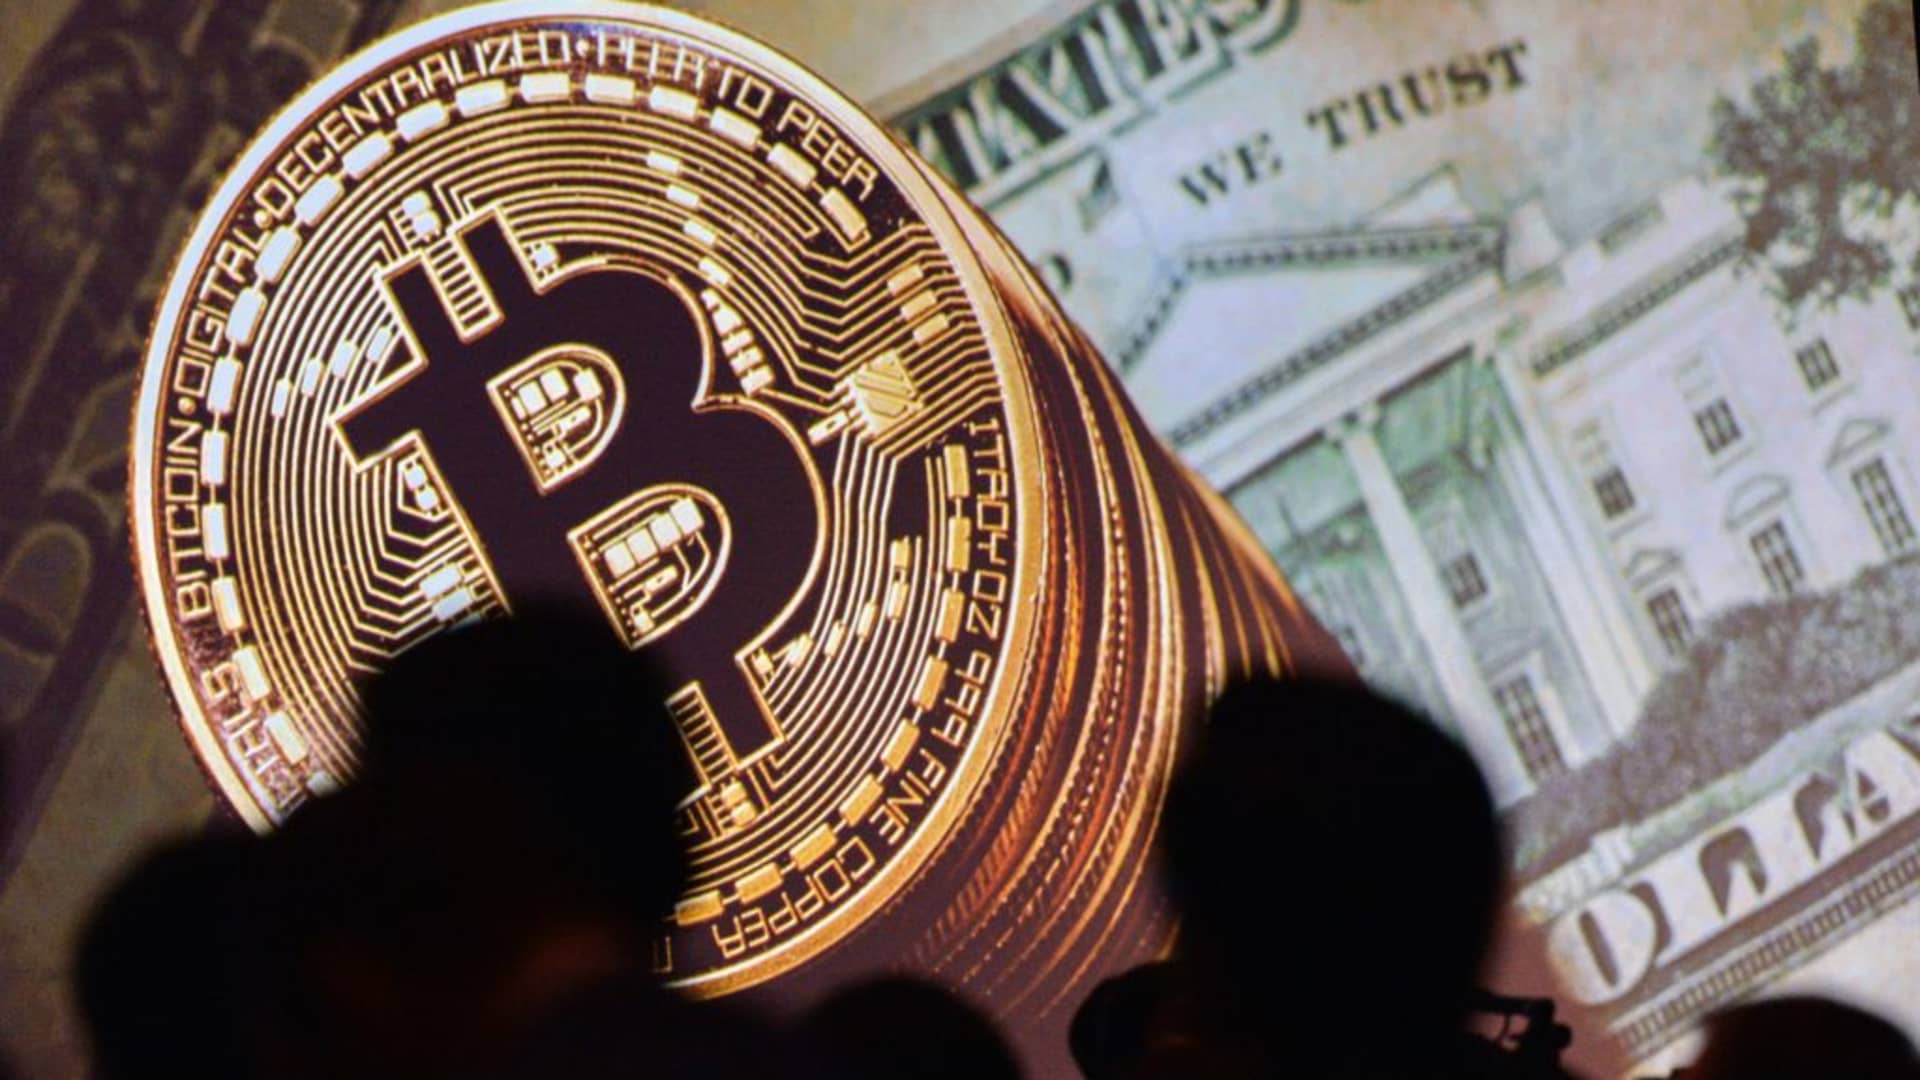 Bitcoin falls from $50,000 following hotter-than-expected inflation data